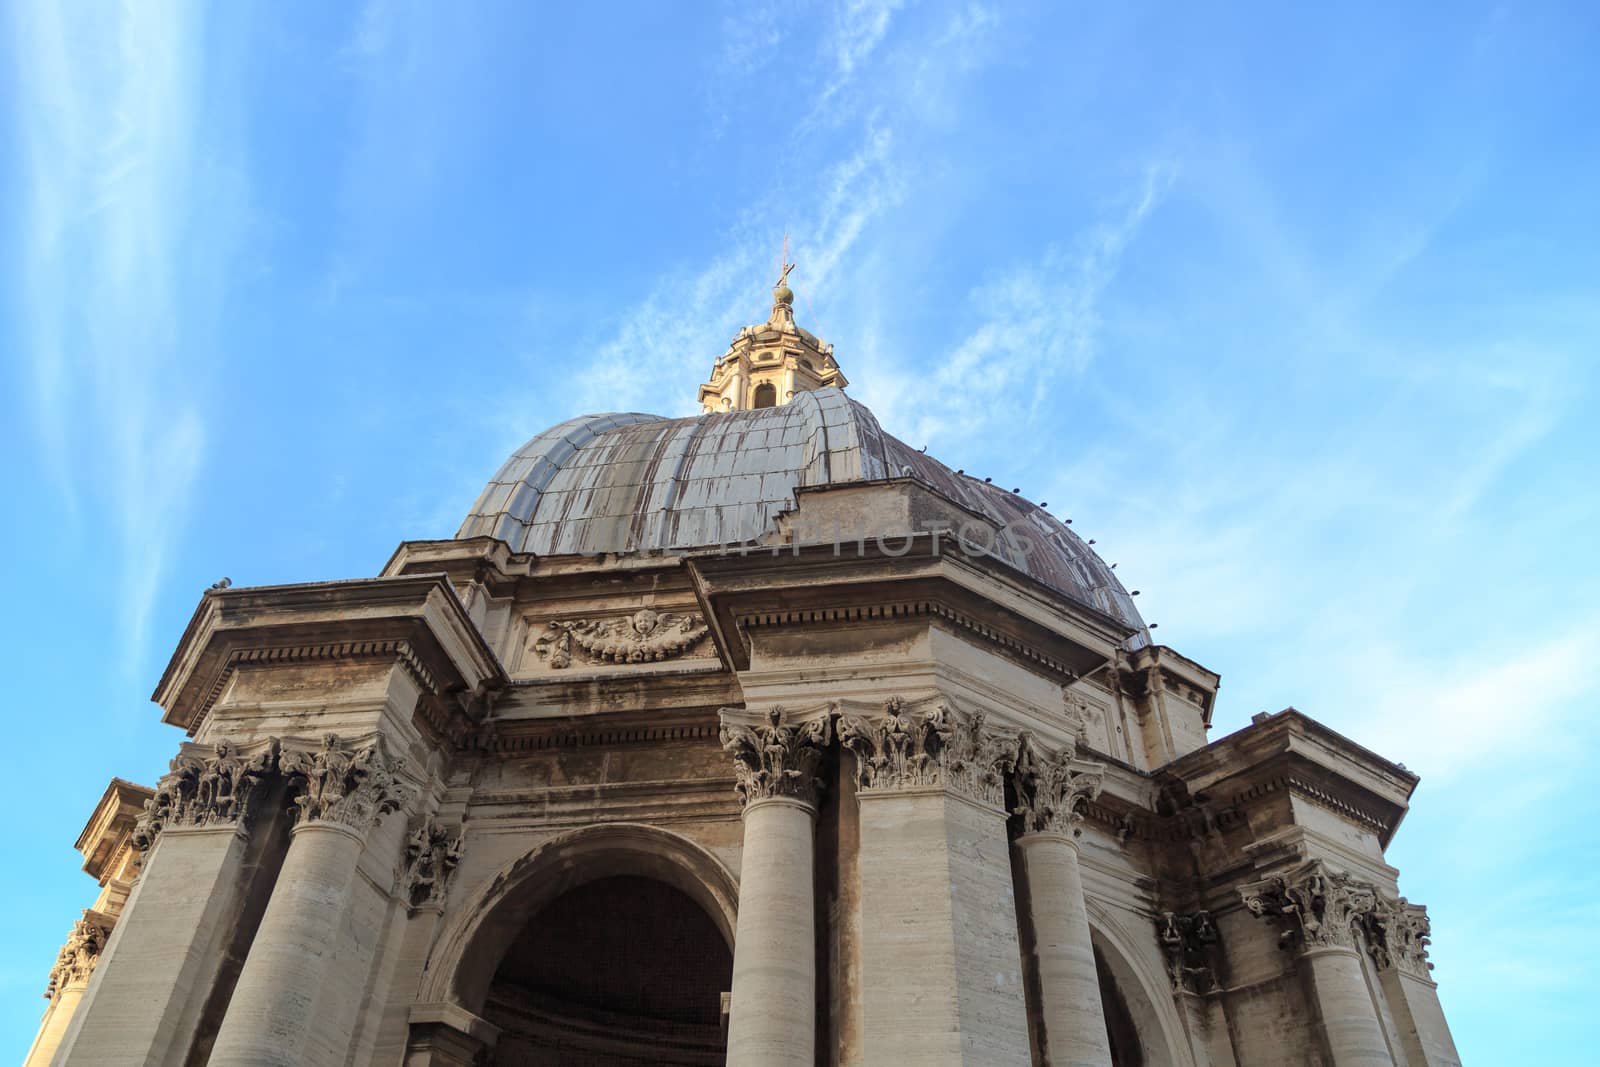 Close up detailed dome view of Saint Peter's Basilica in Vatican, on cloudy blue sky background.